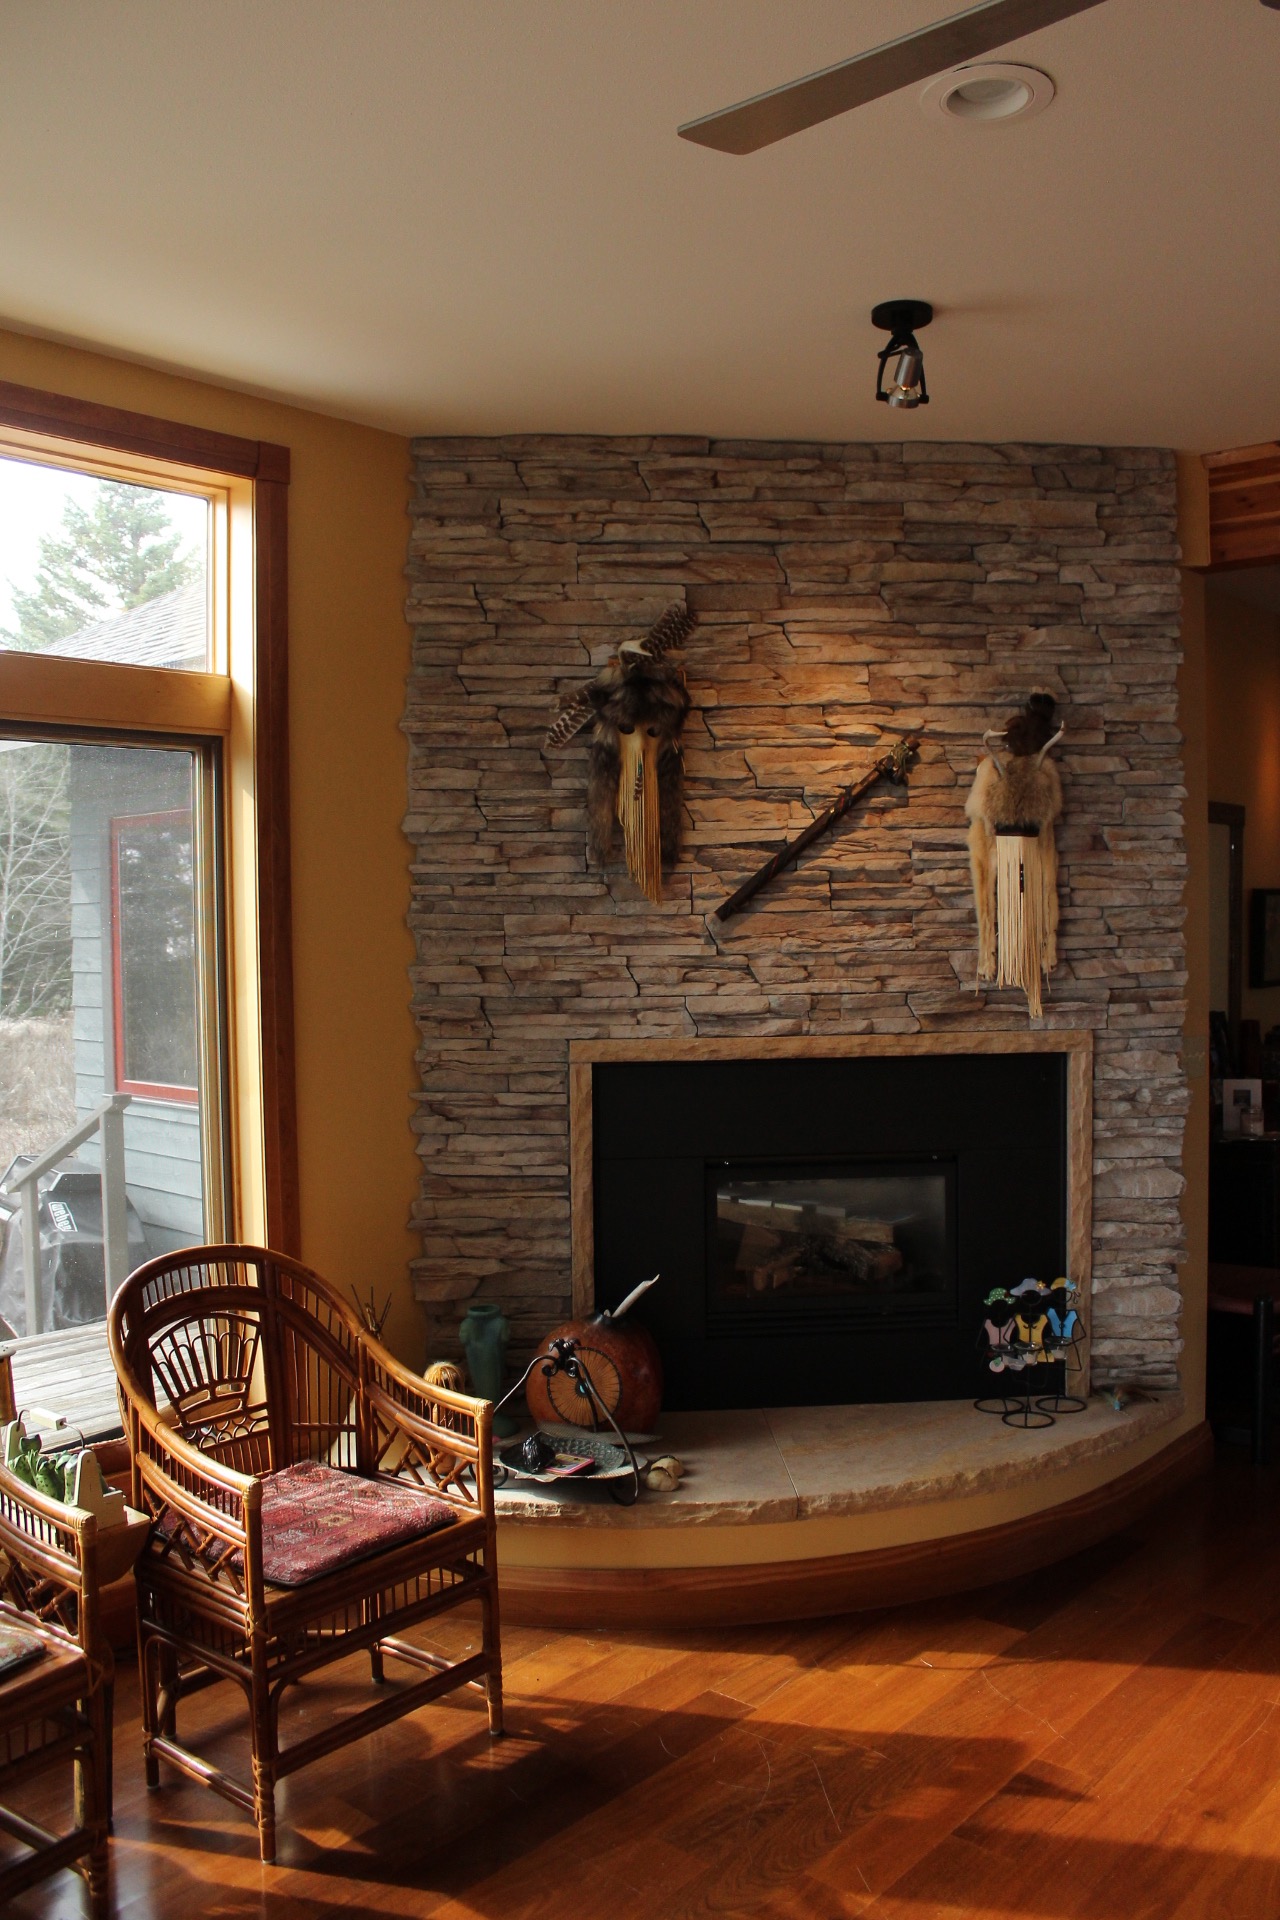 Floor-to-ceiling stone fireplace